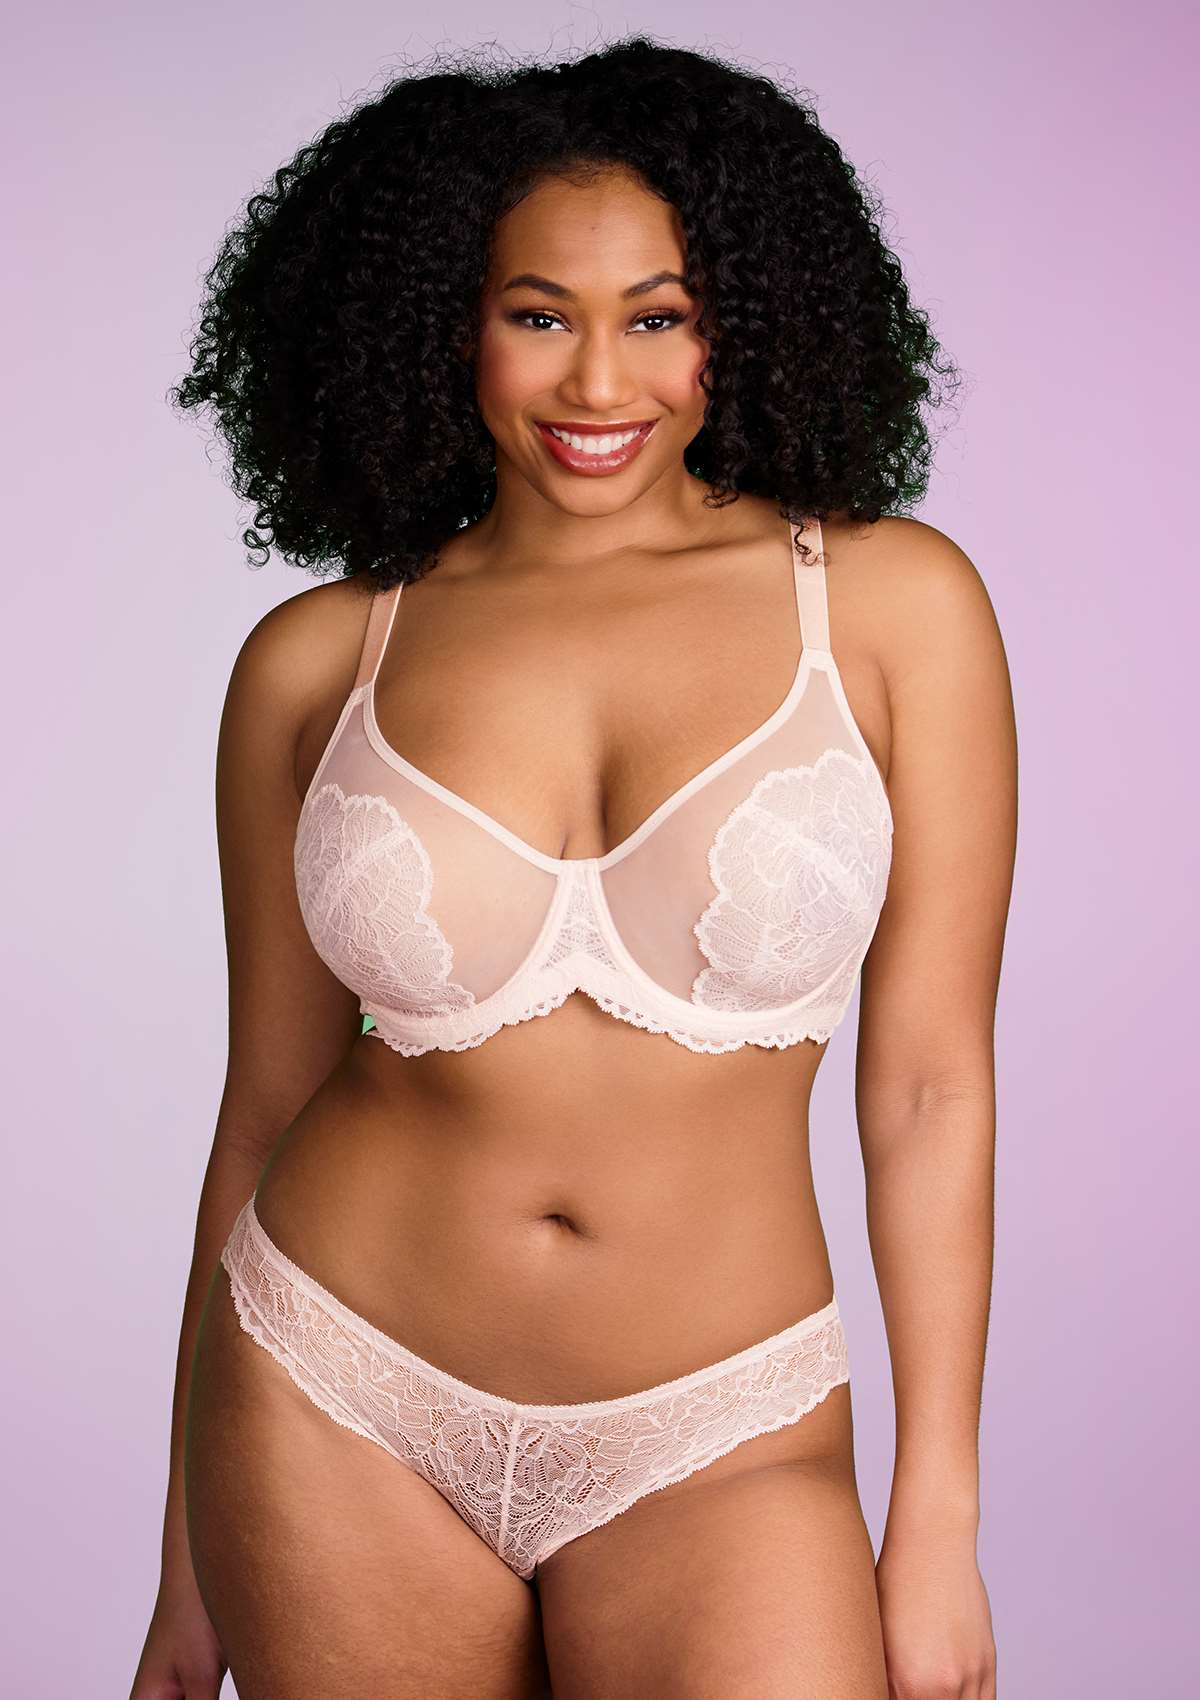 HSIA Blossom Matching Lacey Underwear And Bra Set: Sexy Lace Bra - Dusty Peach / 46 / D